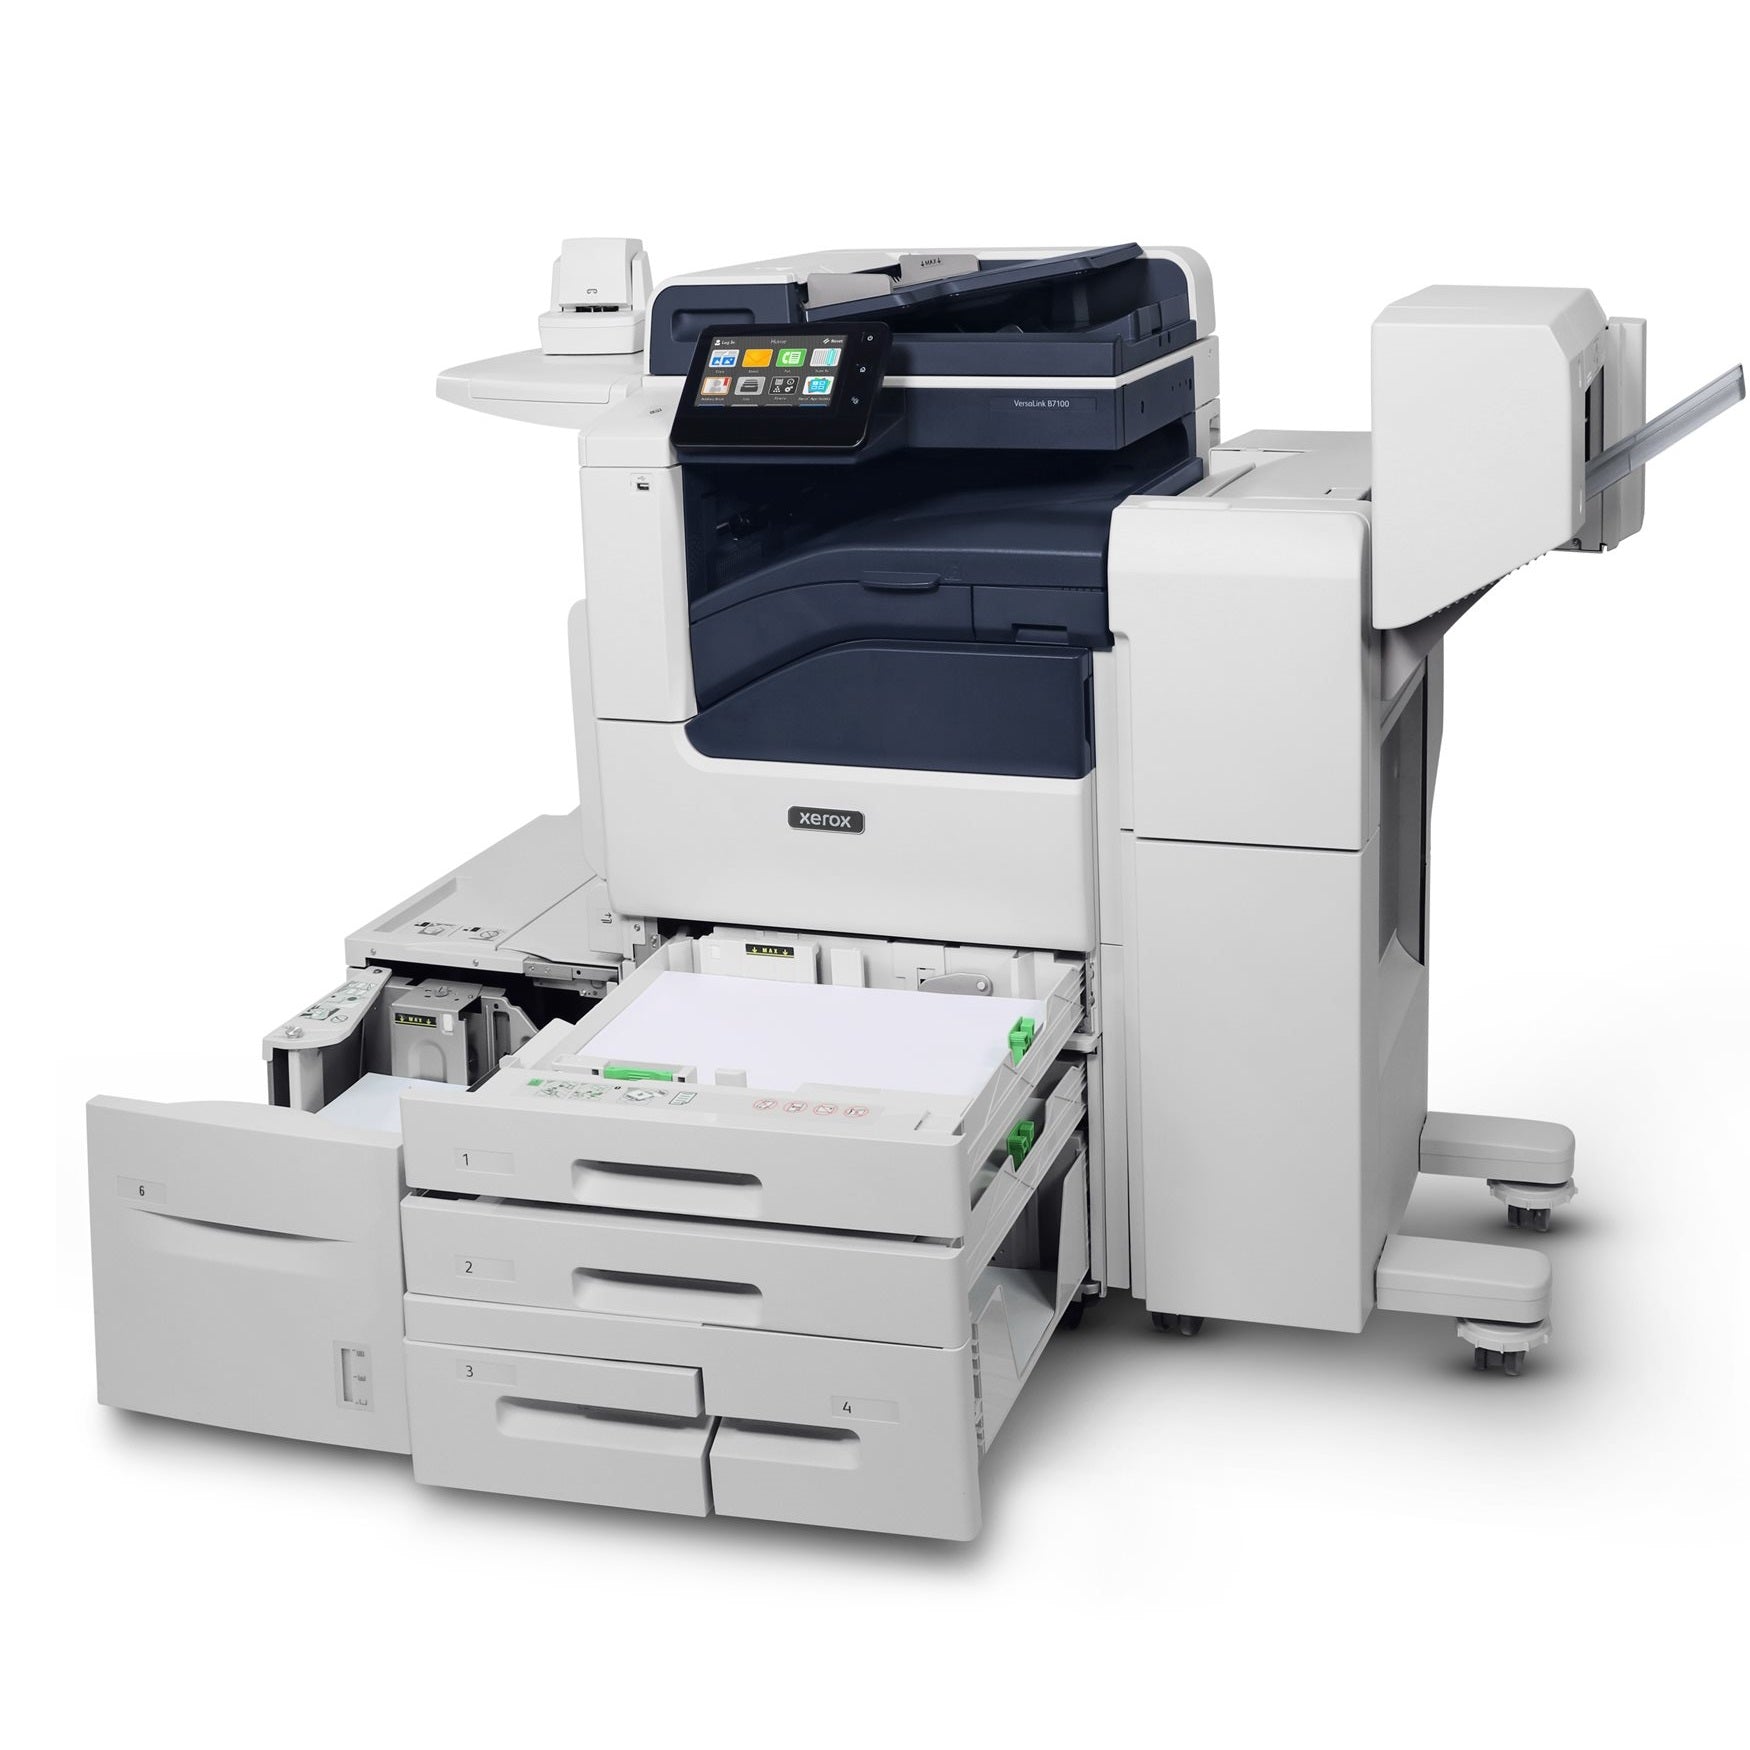 Xerox Versalink B7130 Black And White Multifunction Office Copier Printer Scanner With Support For Tabloid